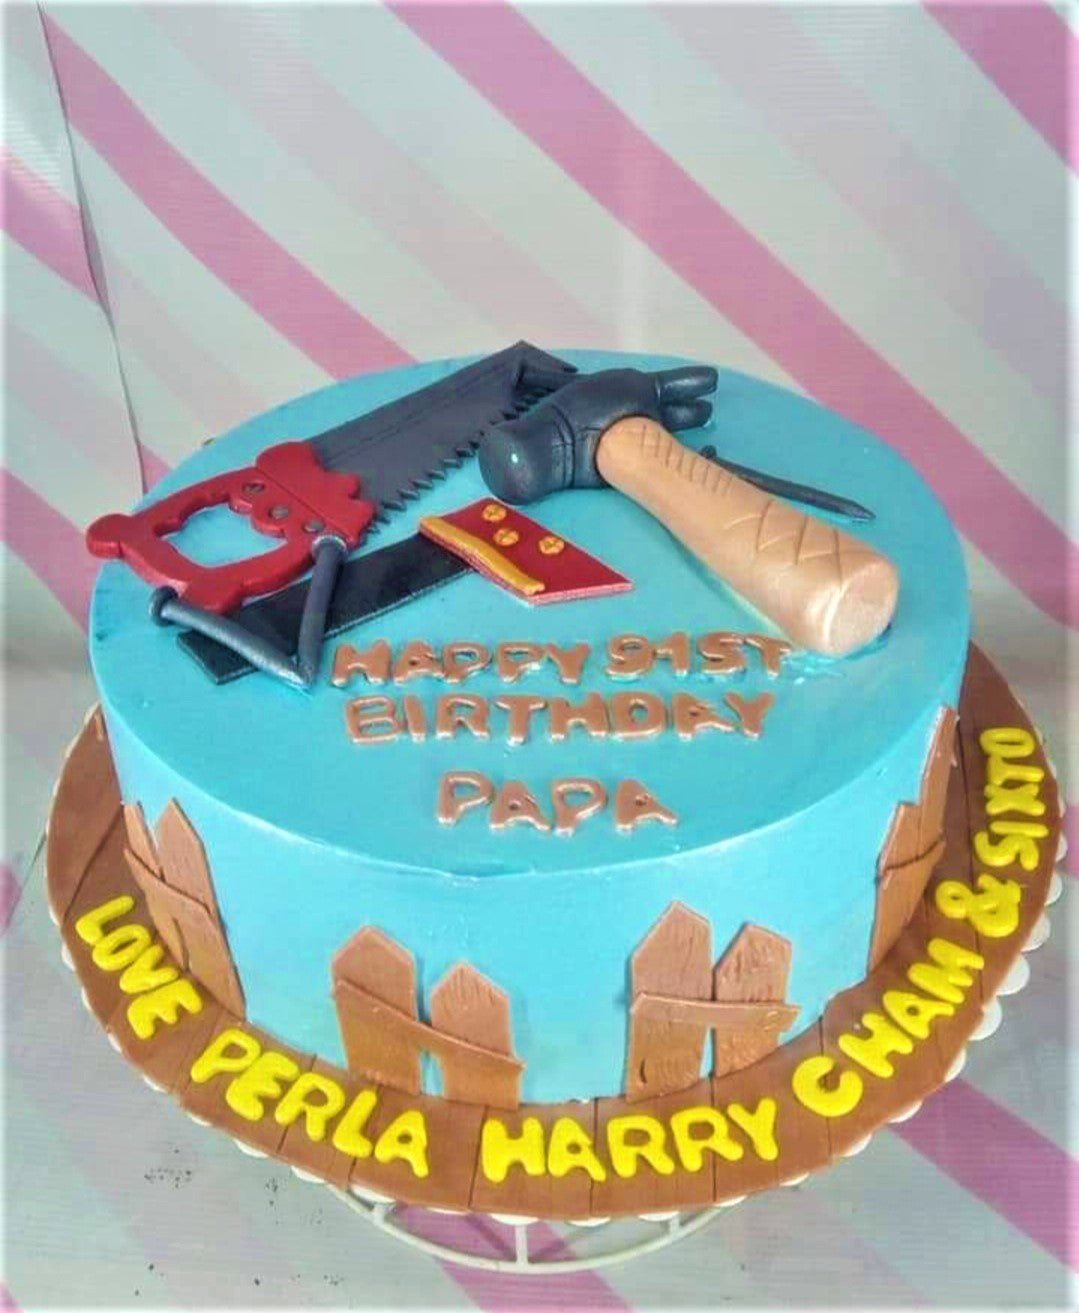 Anosh Cakes - My 1st trial on Carpenter's theme cake at... | Facebook